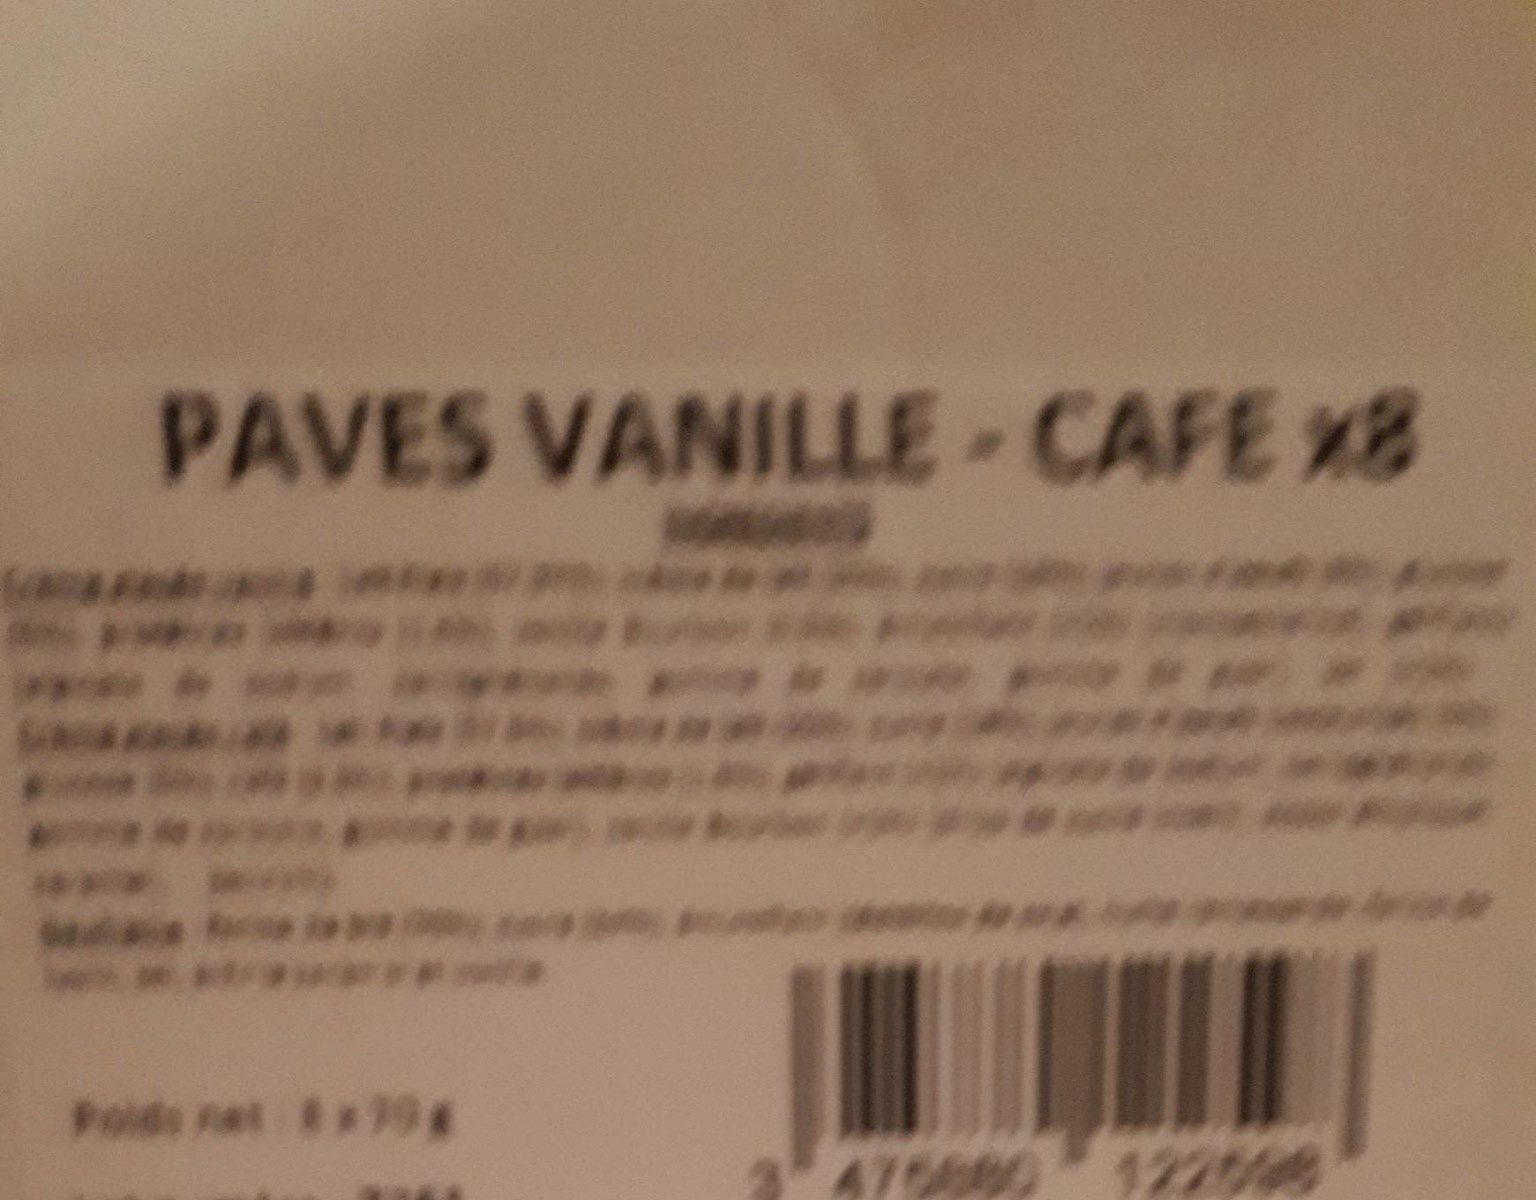 PAVE VANILLE CAFE - Product - fr